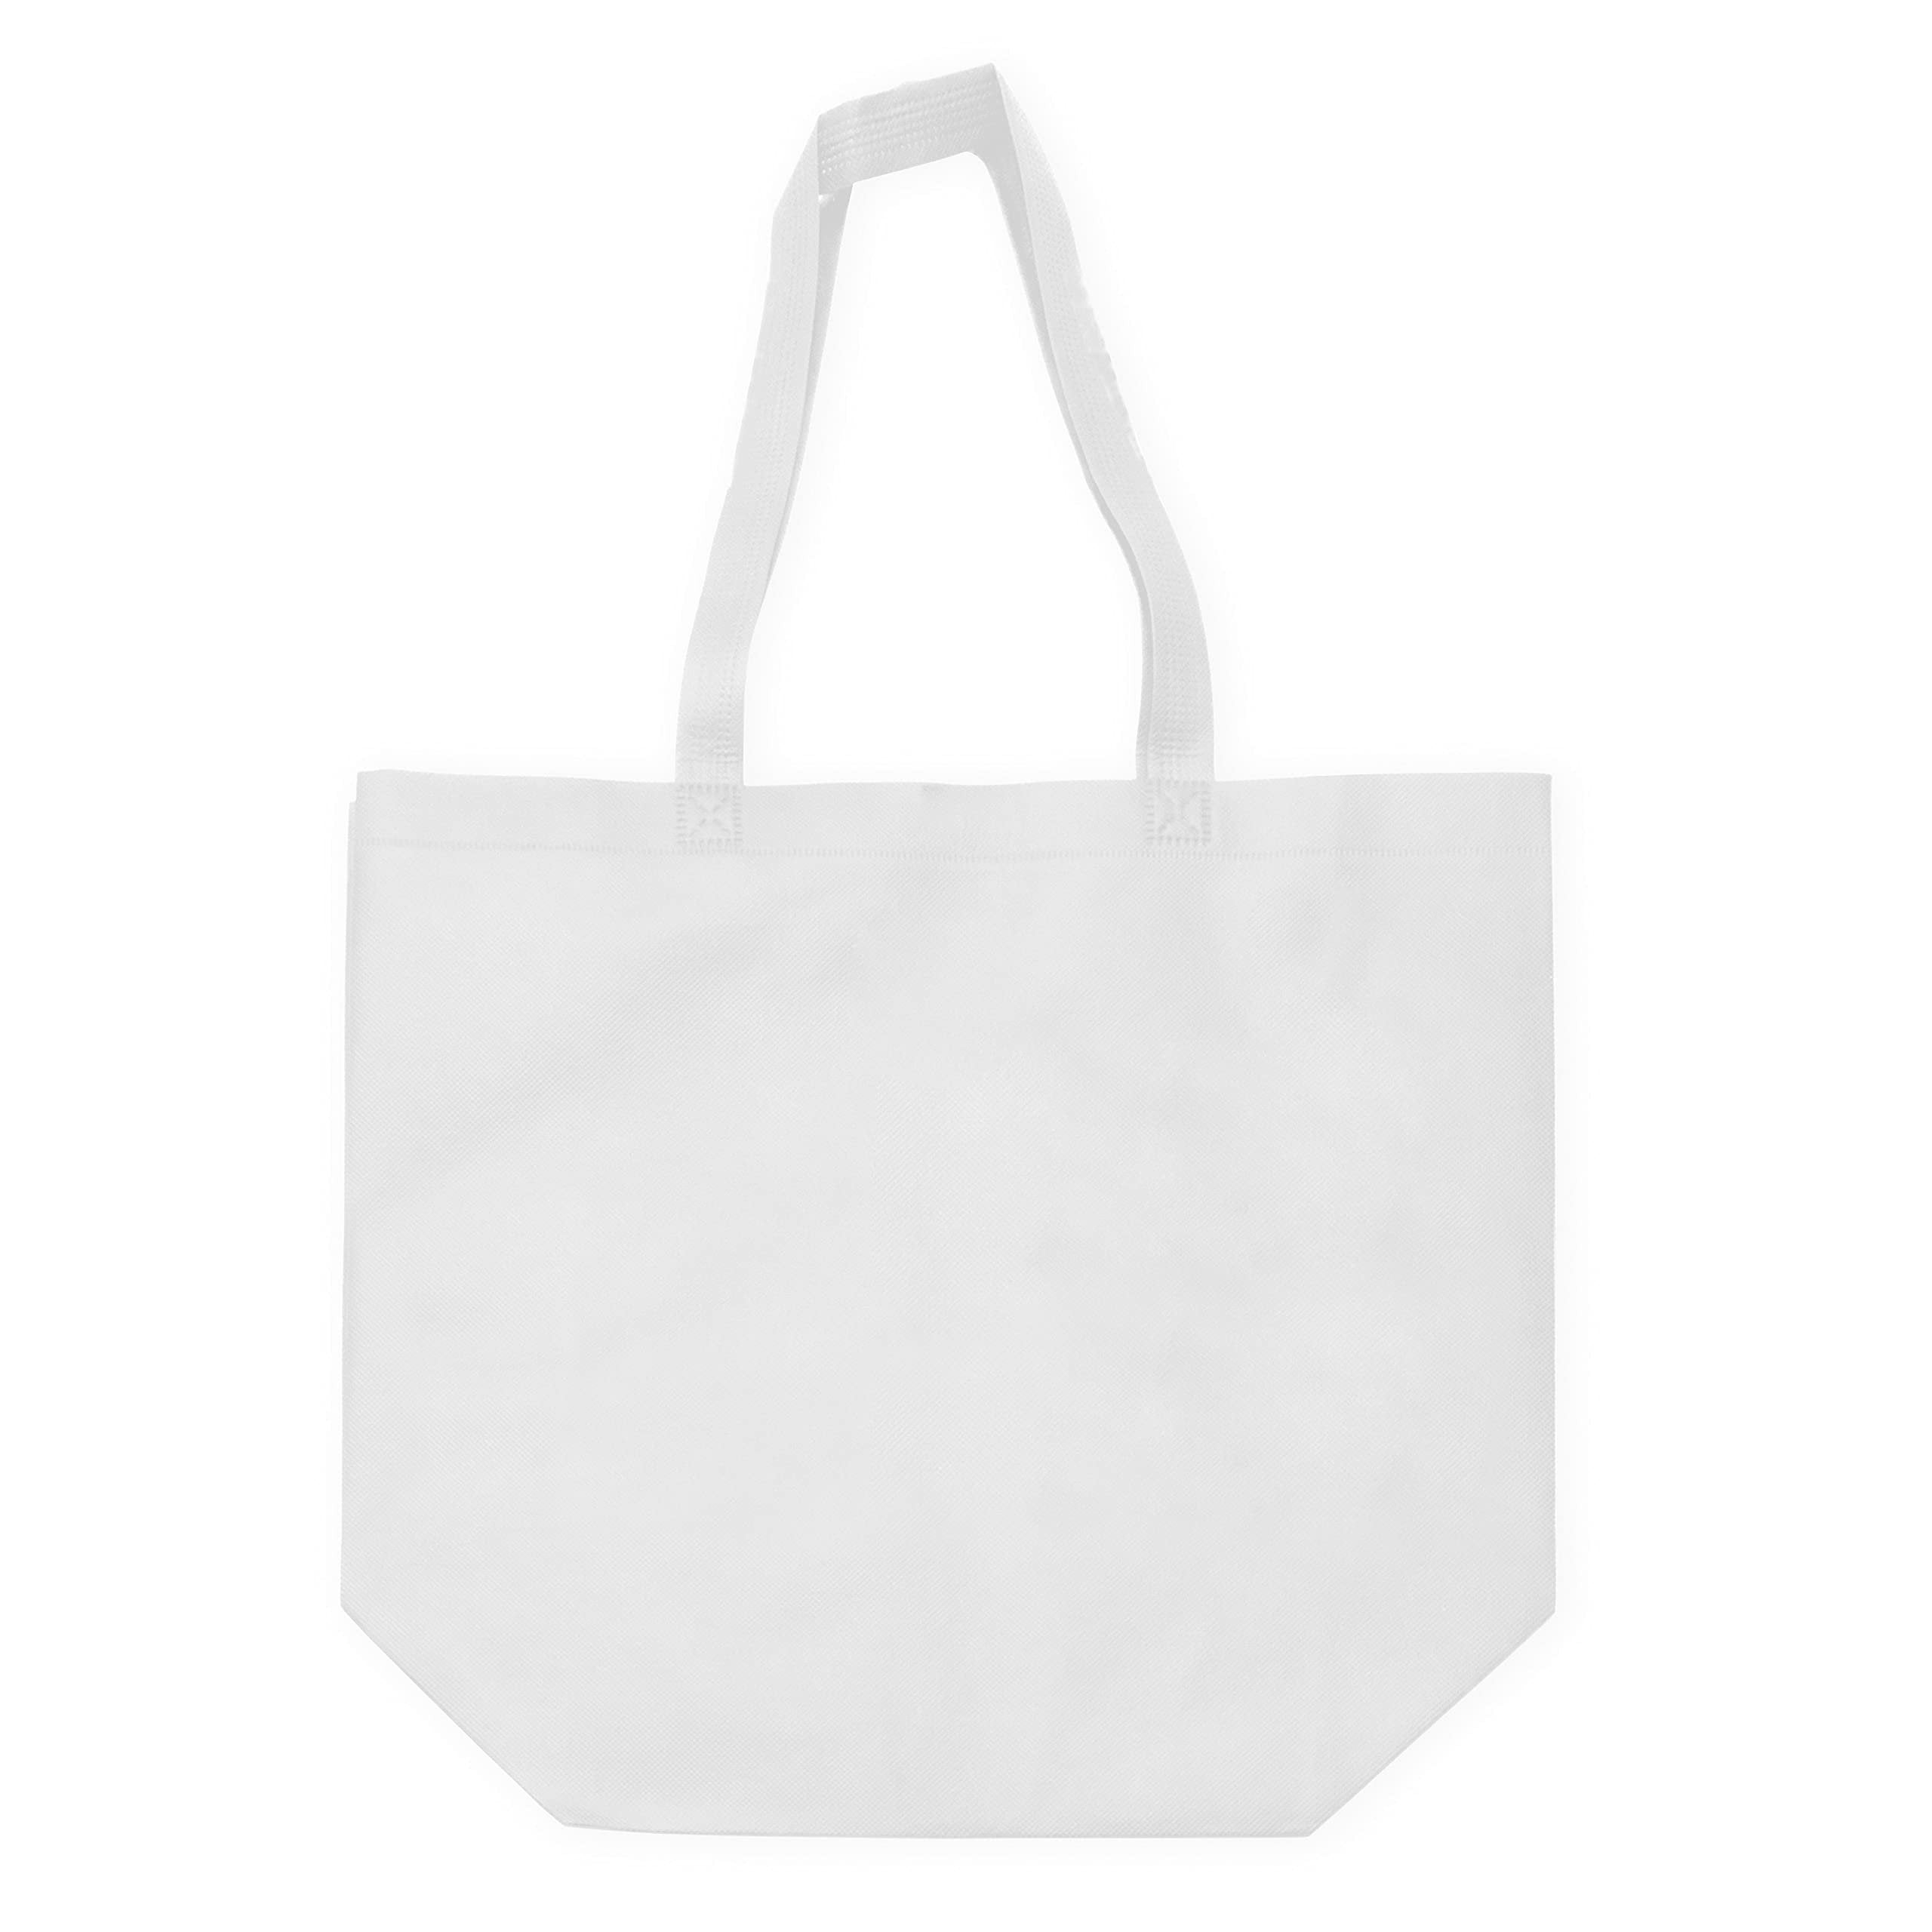 Reusable Gift Bags - 12 Pack Large Totes with Handles, White Eco Friendly Fabric - Size 16x6x12